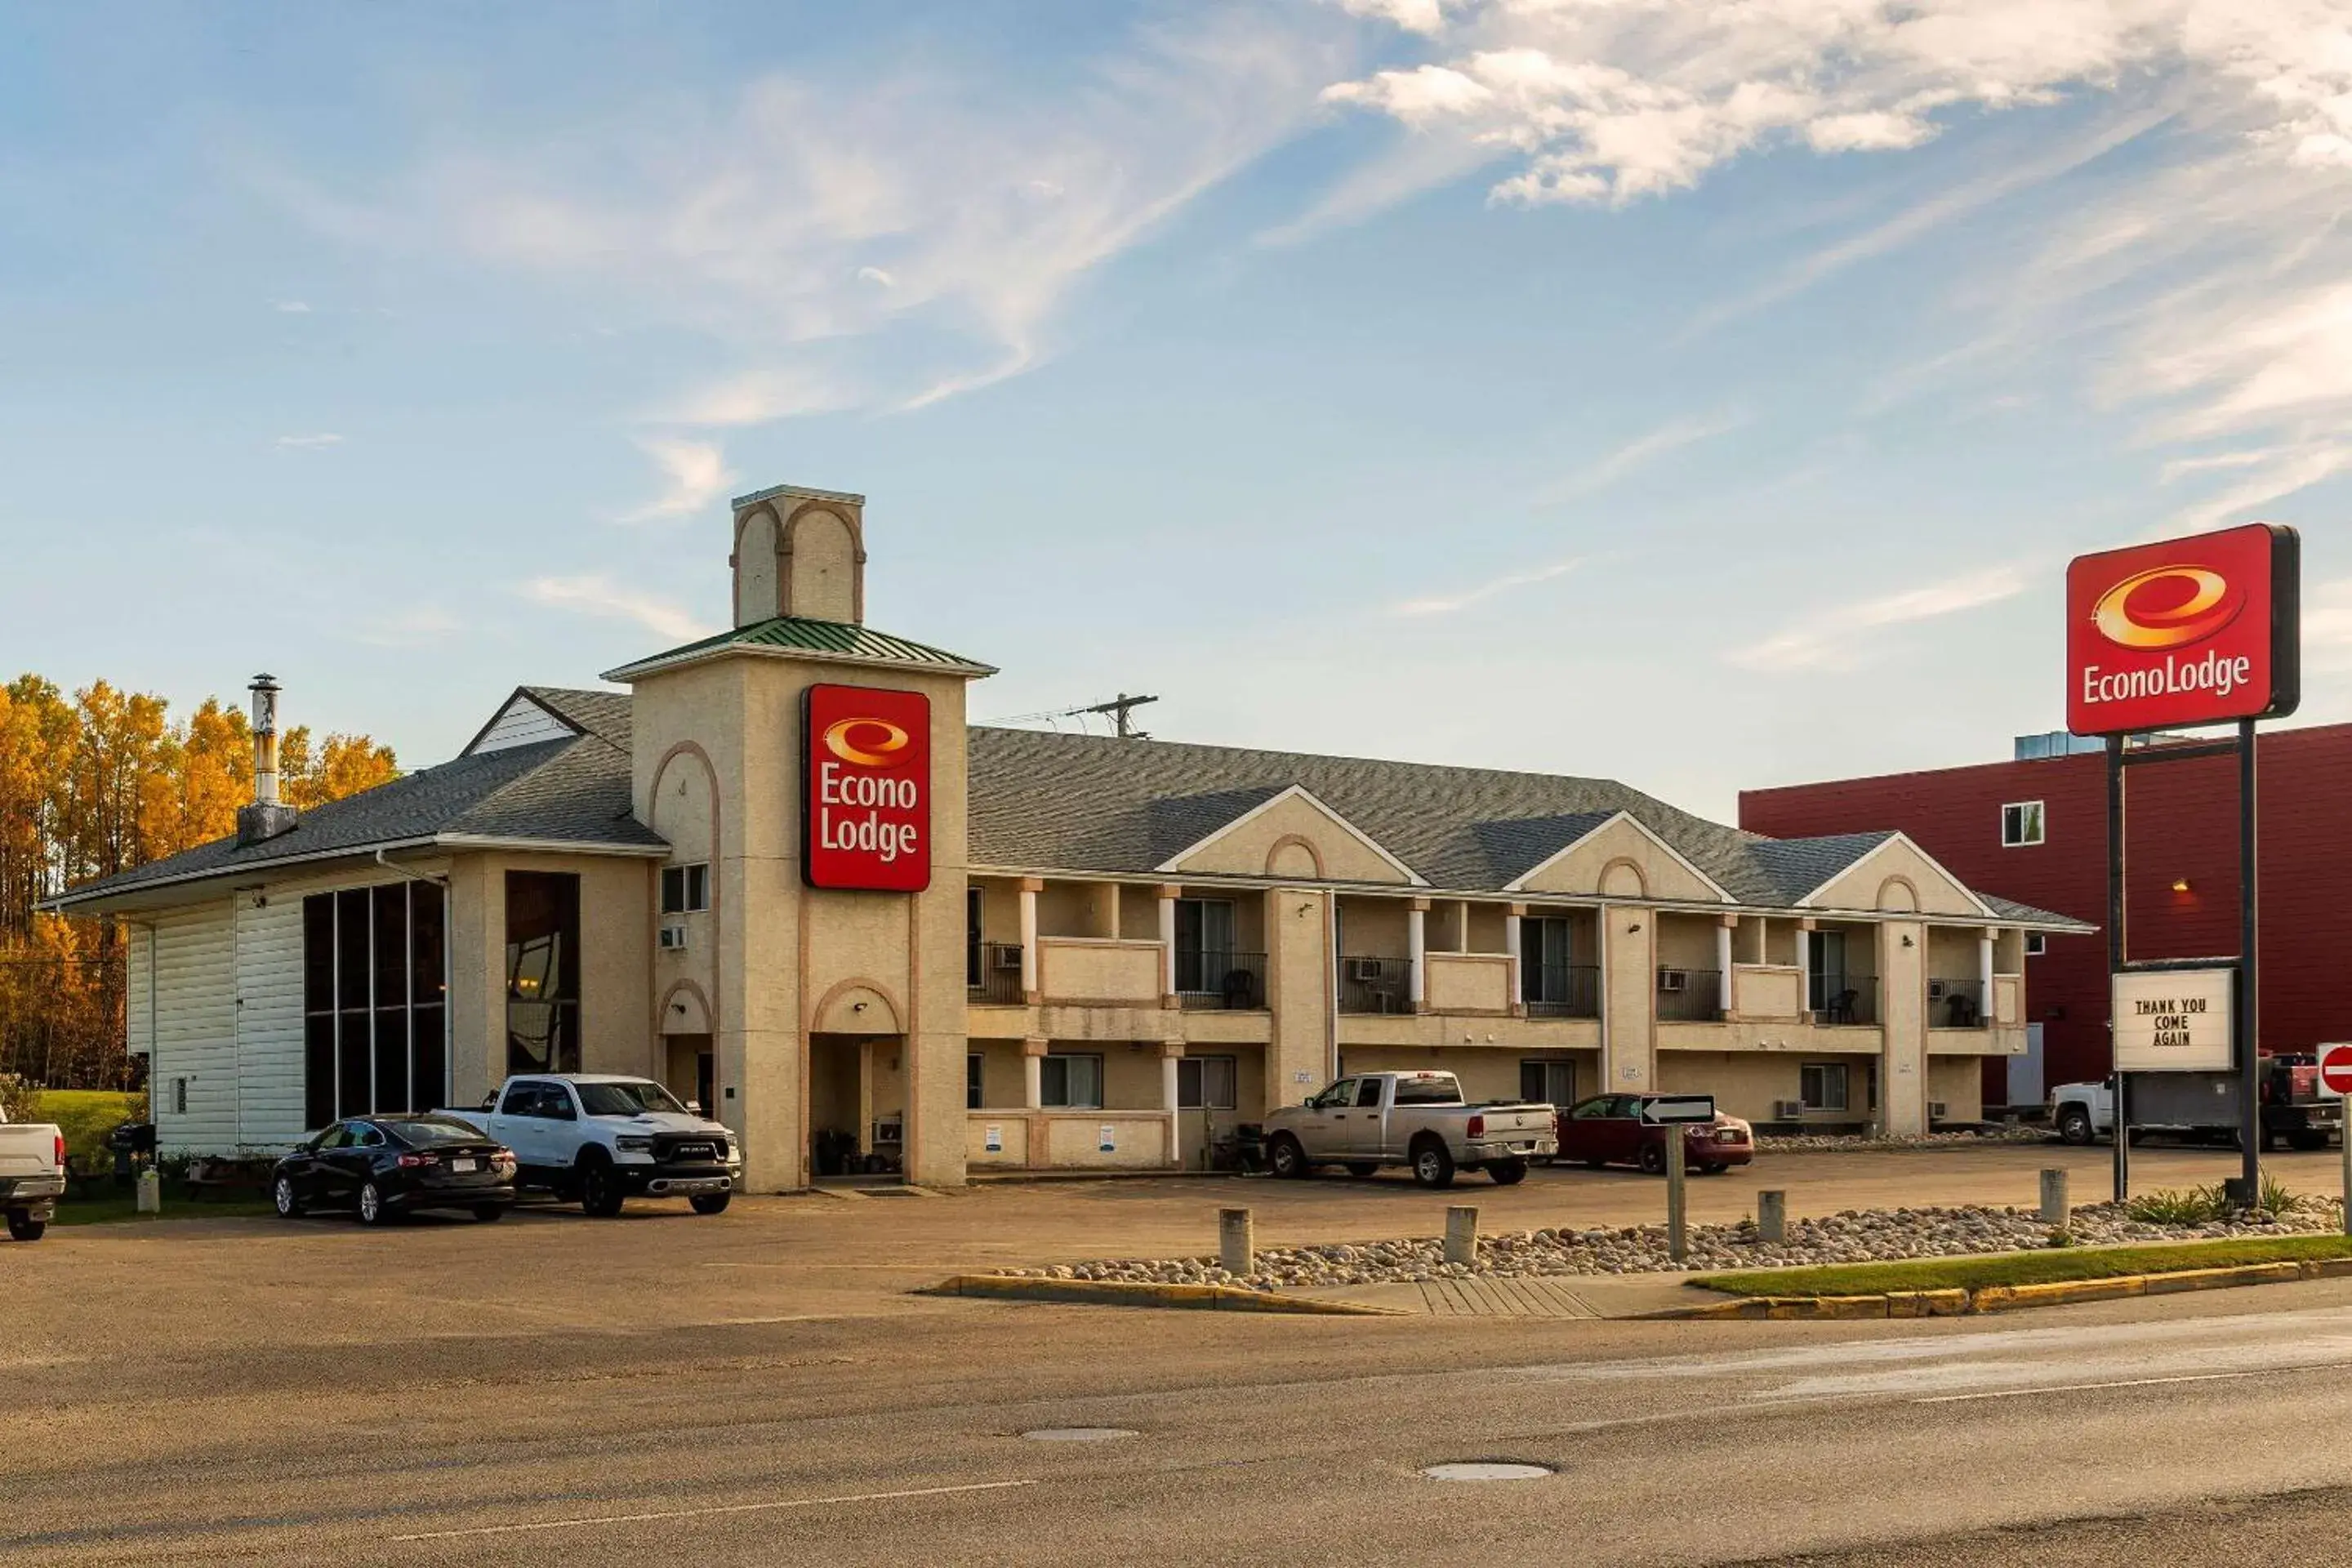 Property Building in Econolodge Edson